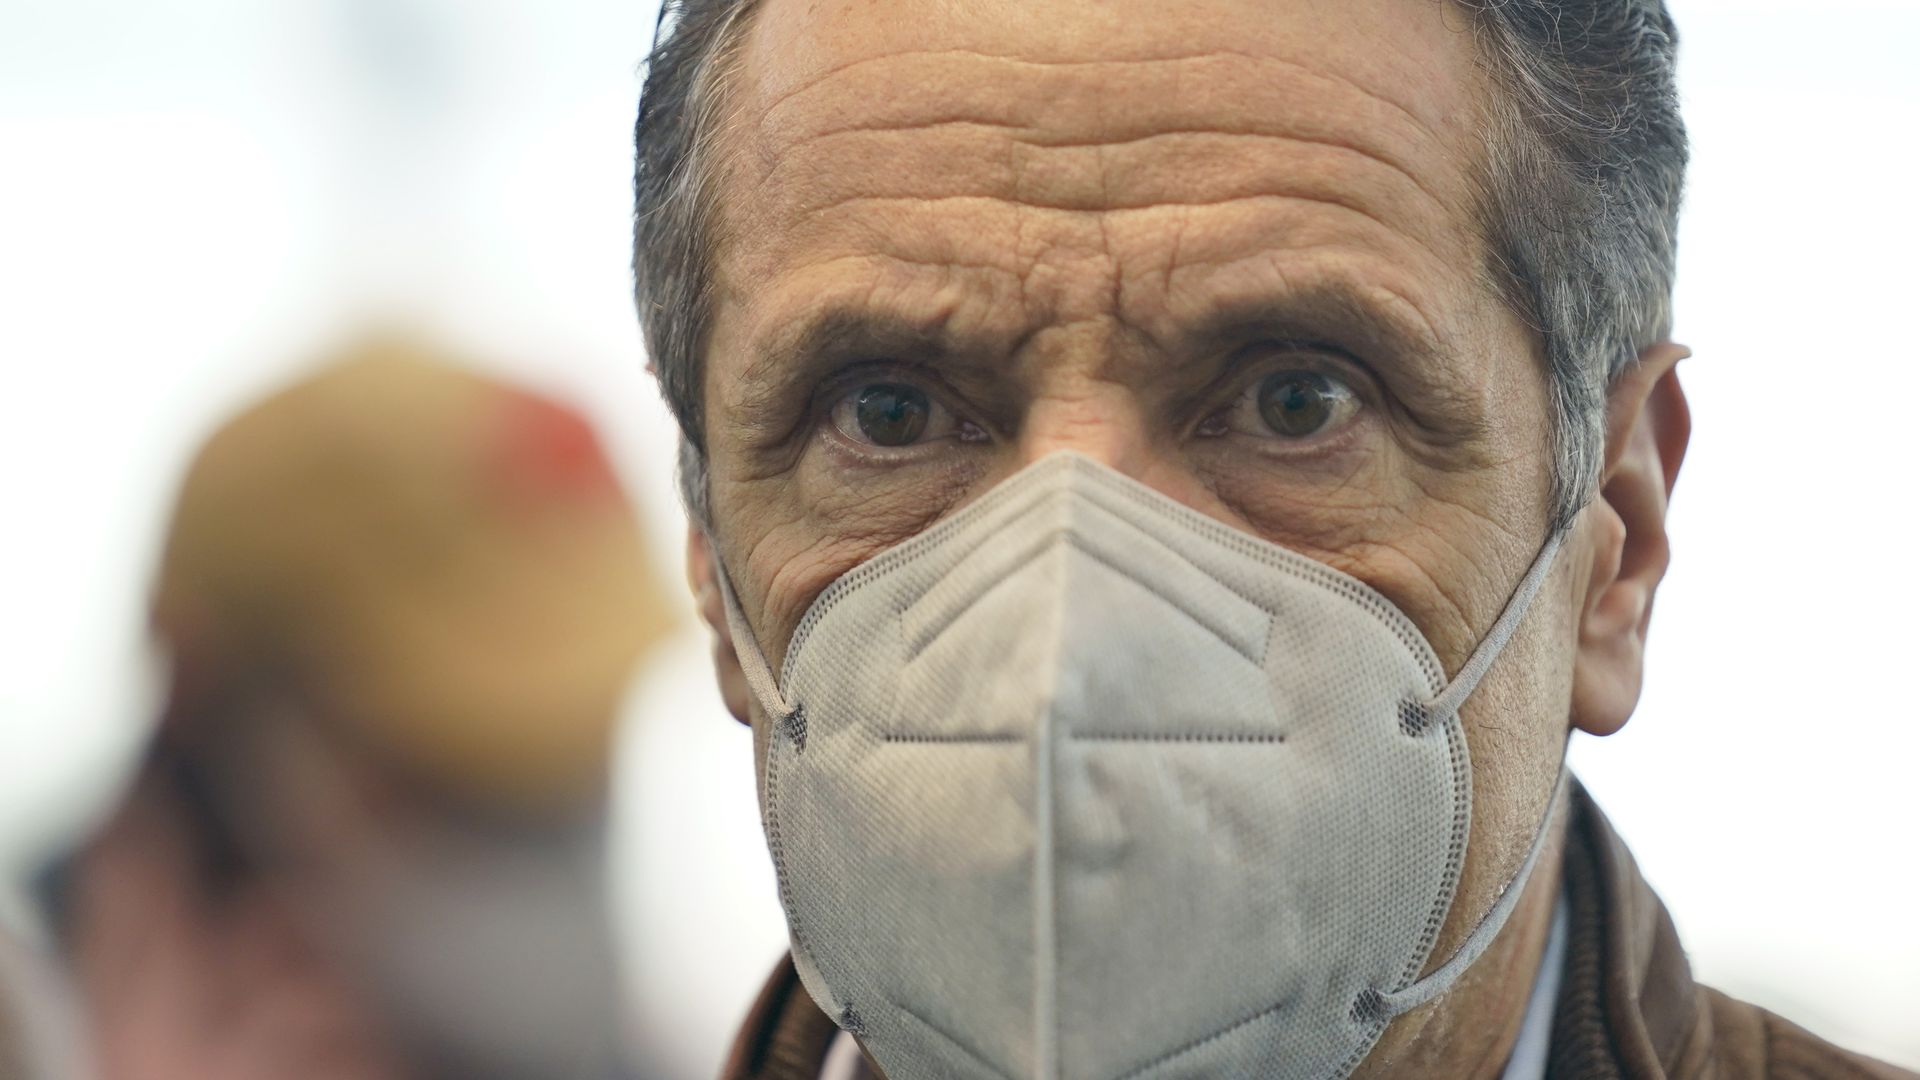 New York Gov. Andrew Cuomo is seen wearing an N-95 mask at an event on Monday.